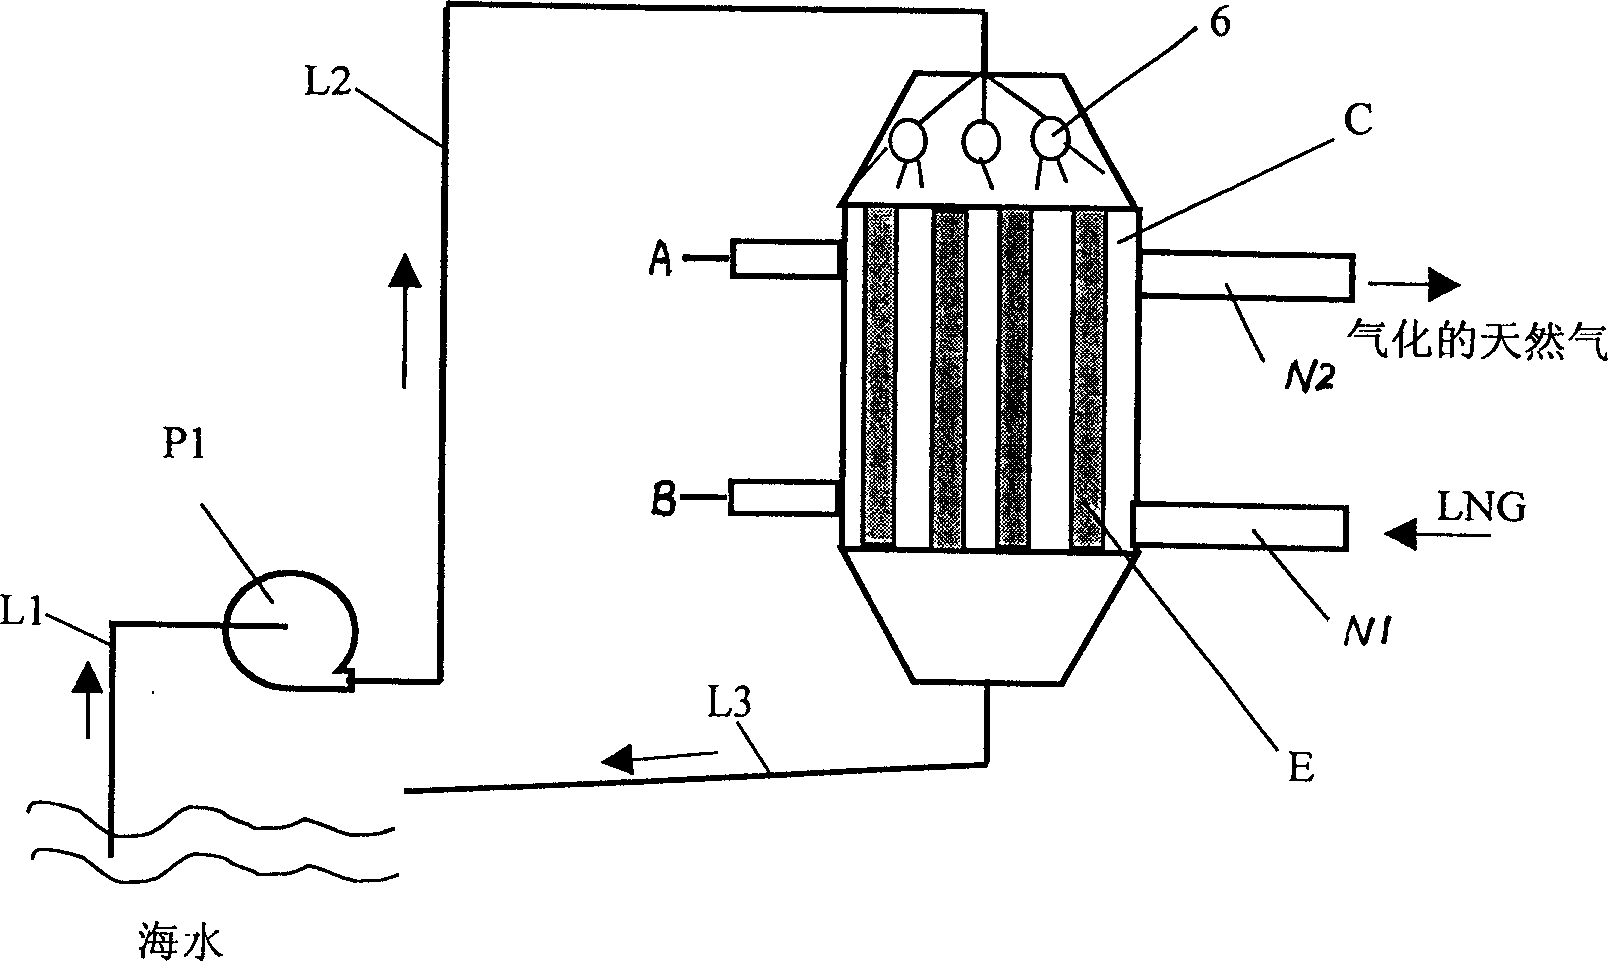 Method and apparatus of semiconductor generating electricity and producing hydrogen using temperature difference and liquid natural gas providing cooling energy